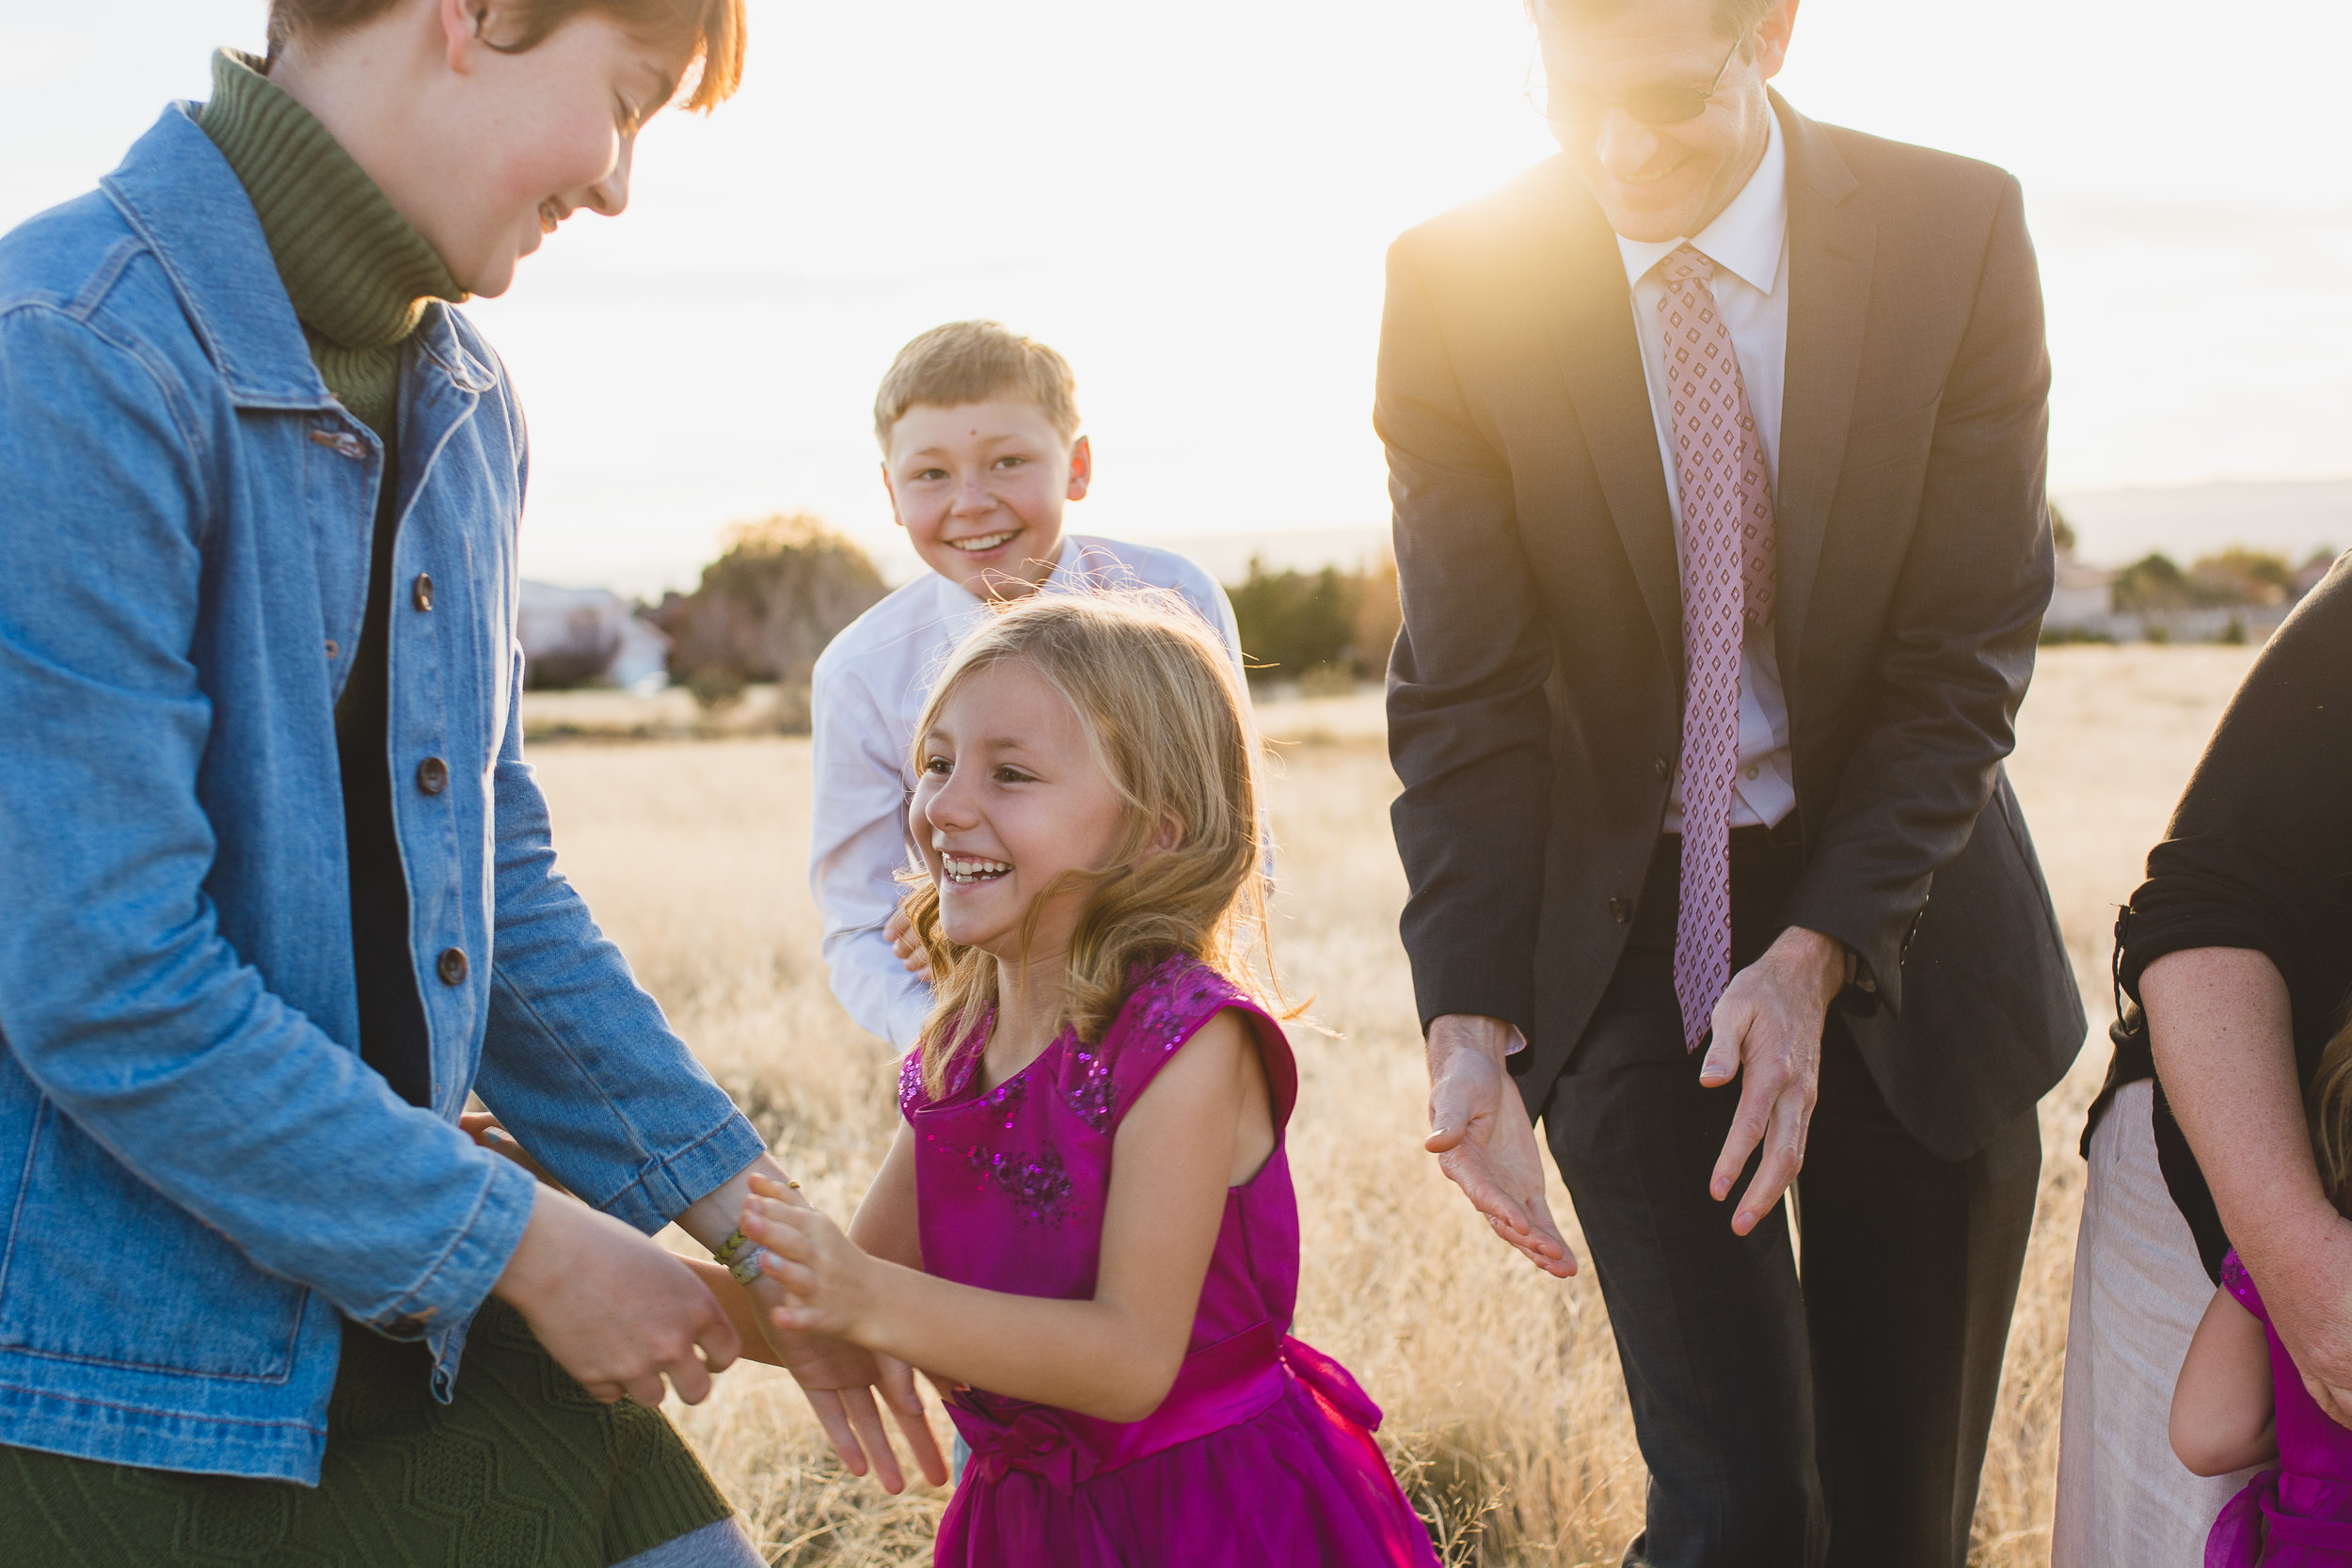 Family caught in the moment of playing with each other in yellow field in Albuquerque